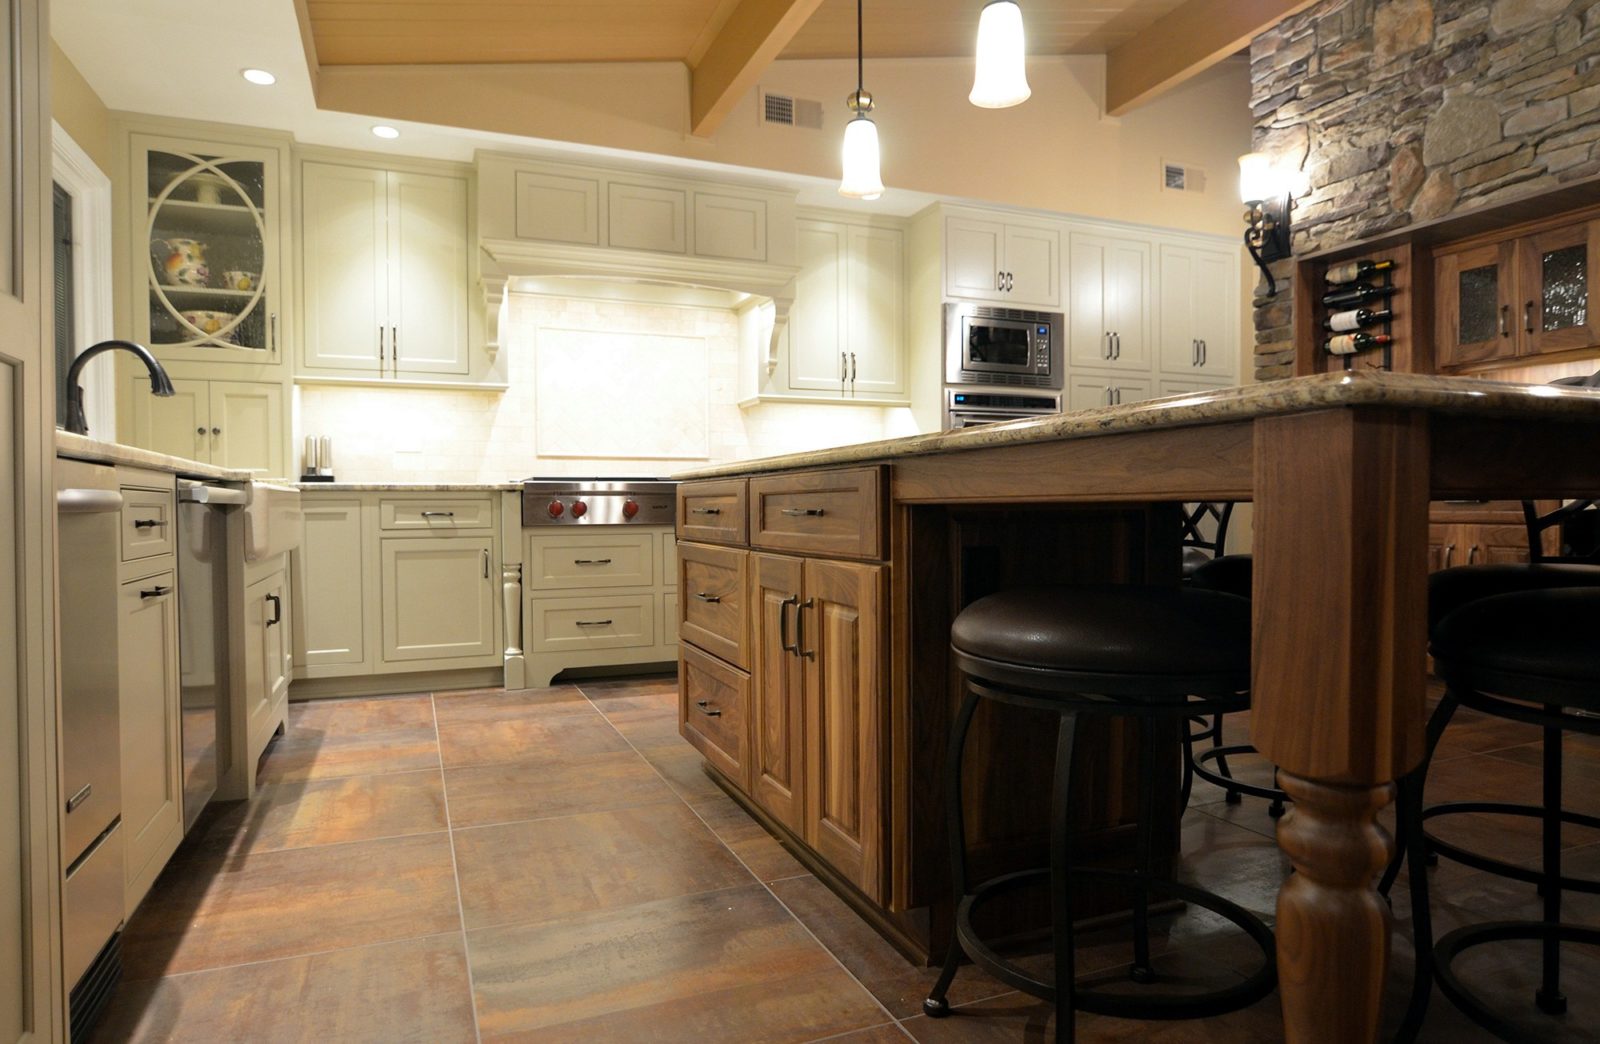 Kitchen with cabinets, drawers, sink, appliances, windows, and island table with chairs